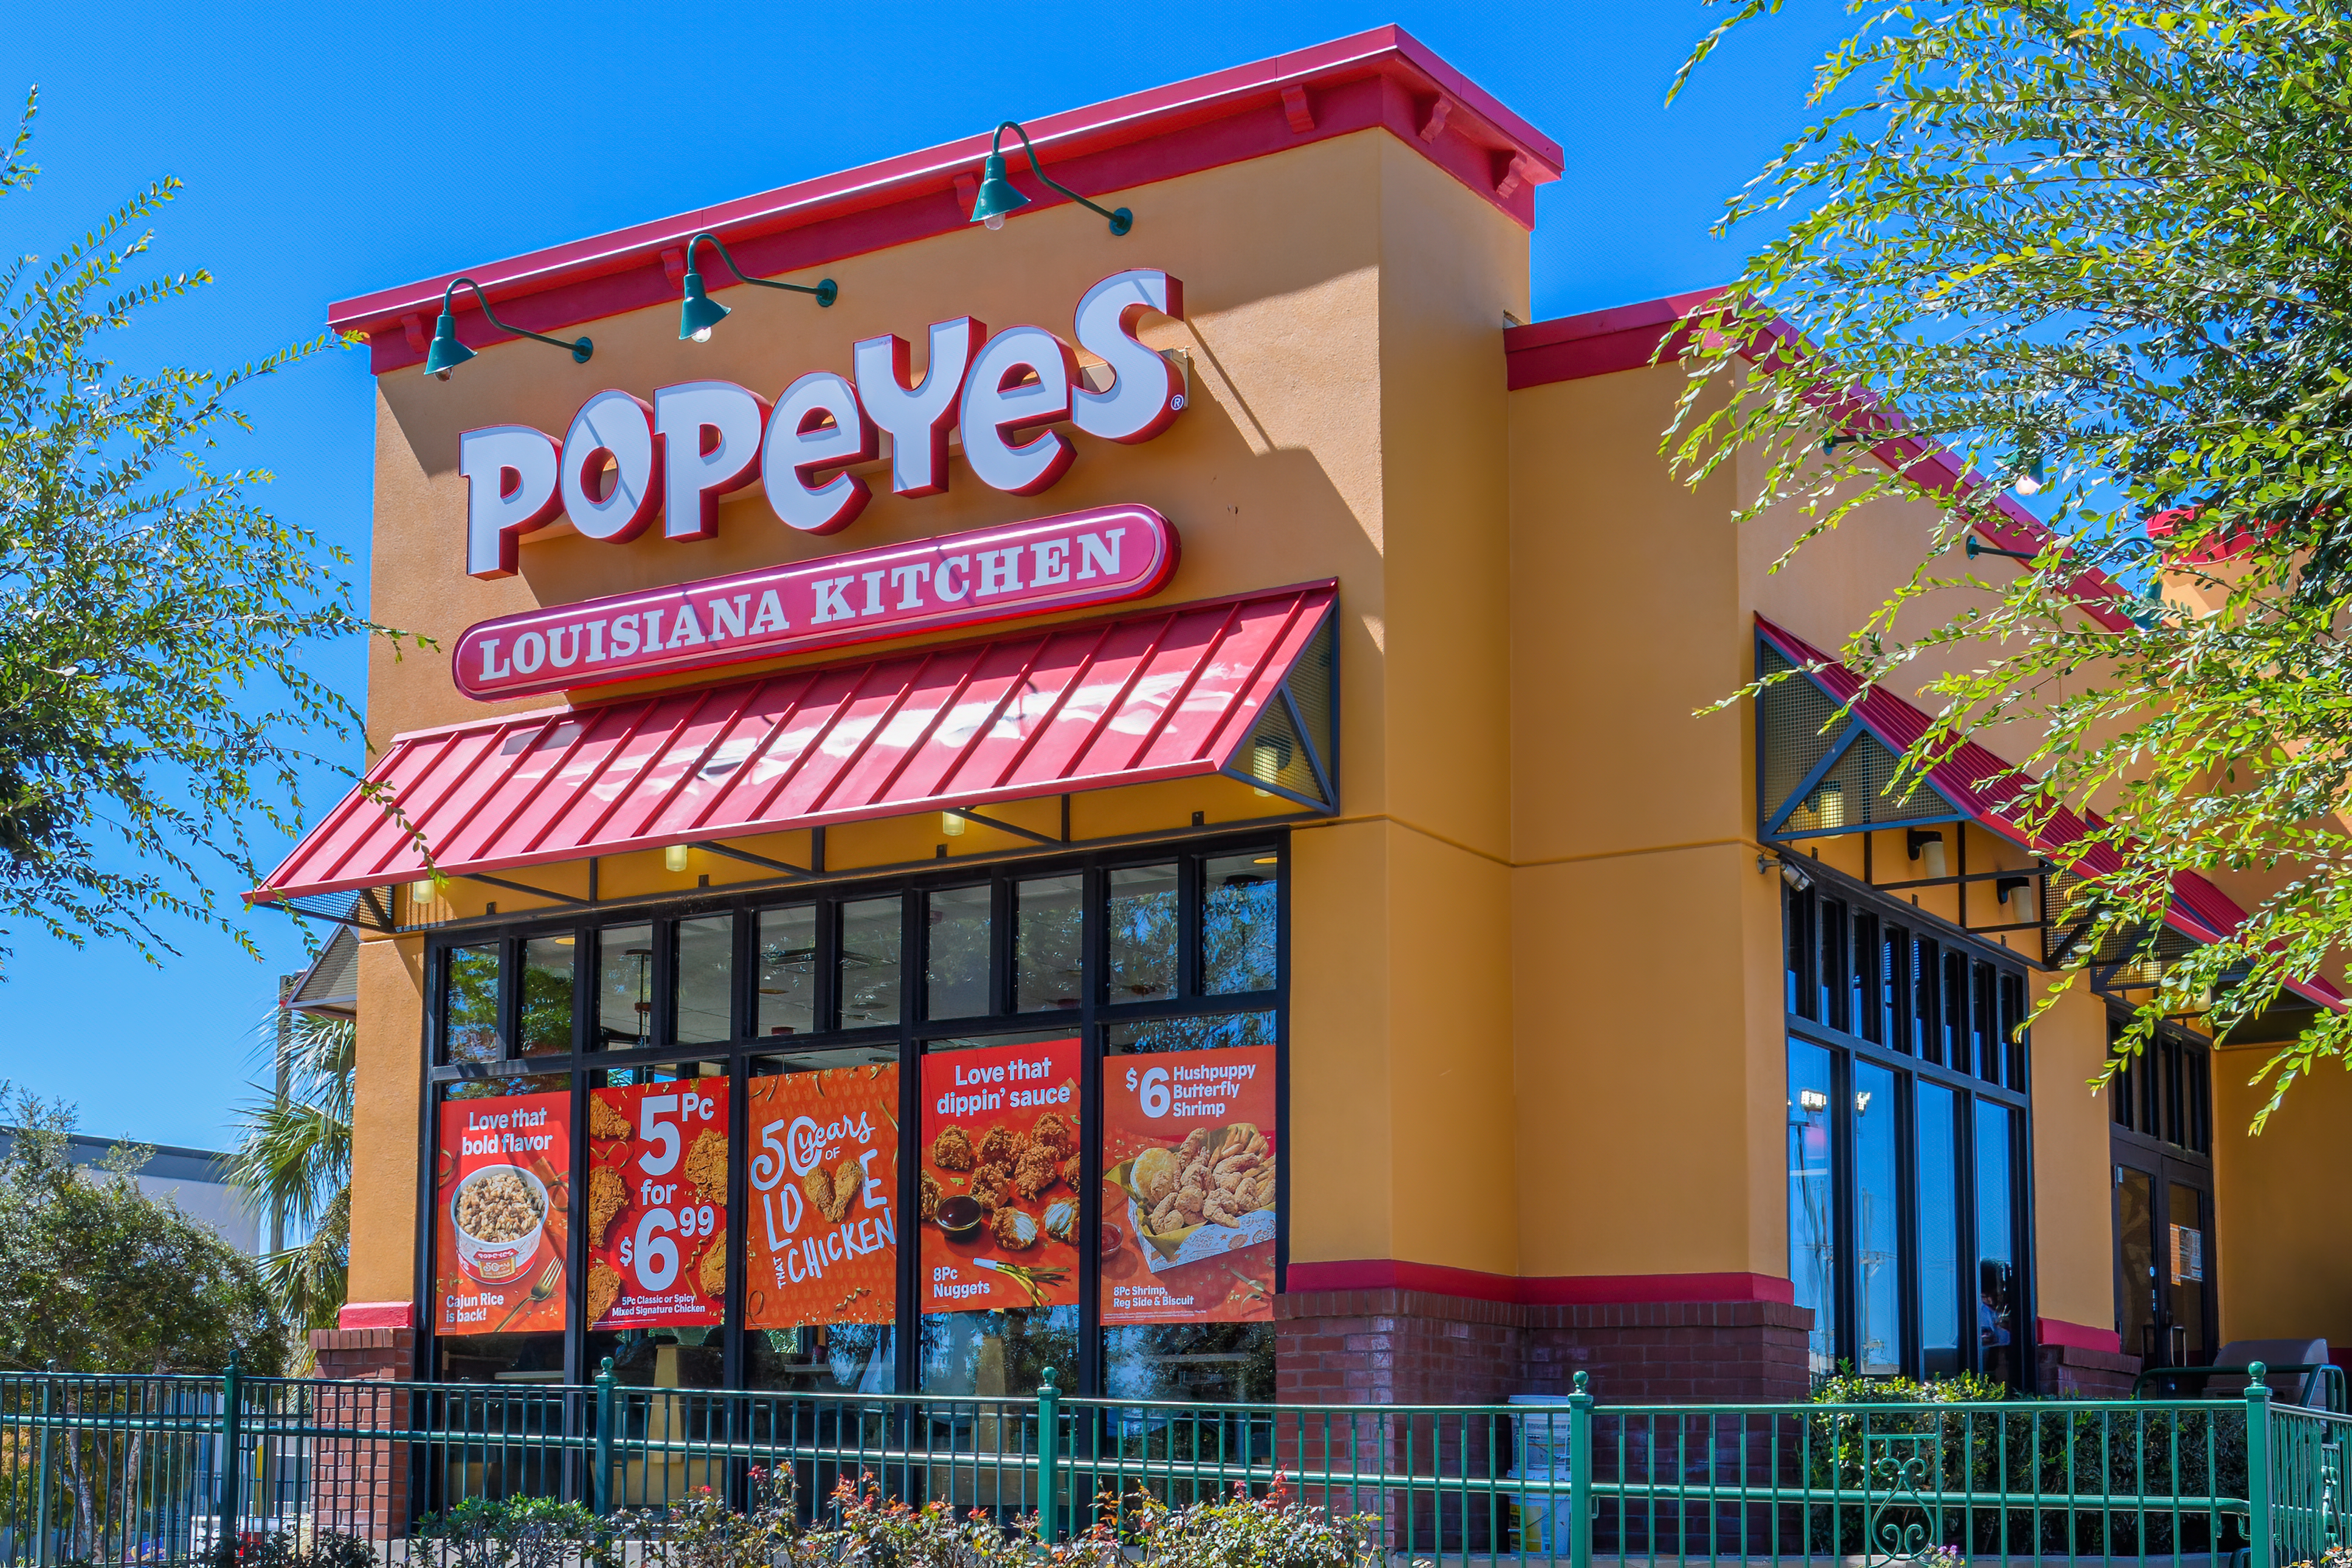 A building with an orange and red color scheme with a large sign reading “Popeyes Louisiana Kitchen.”